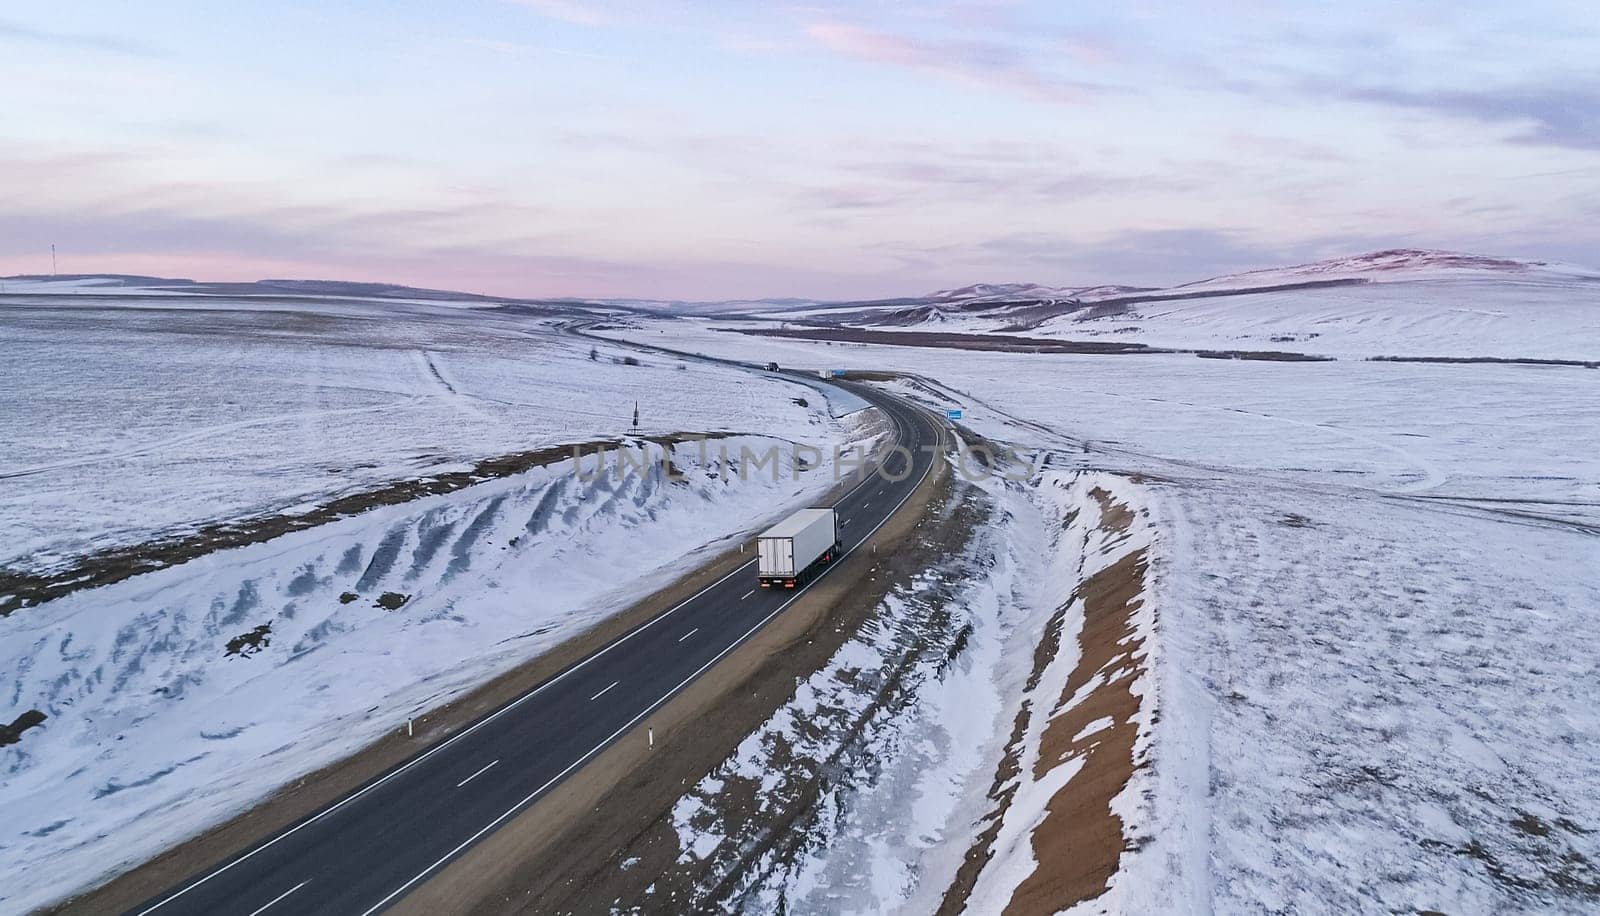 A lone semi truck drives along a winding rural highway through a snow-covered landscape during dusk in winter.